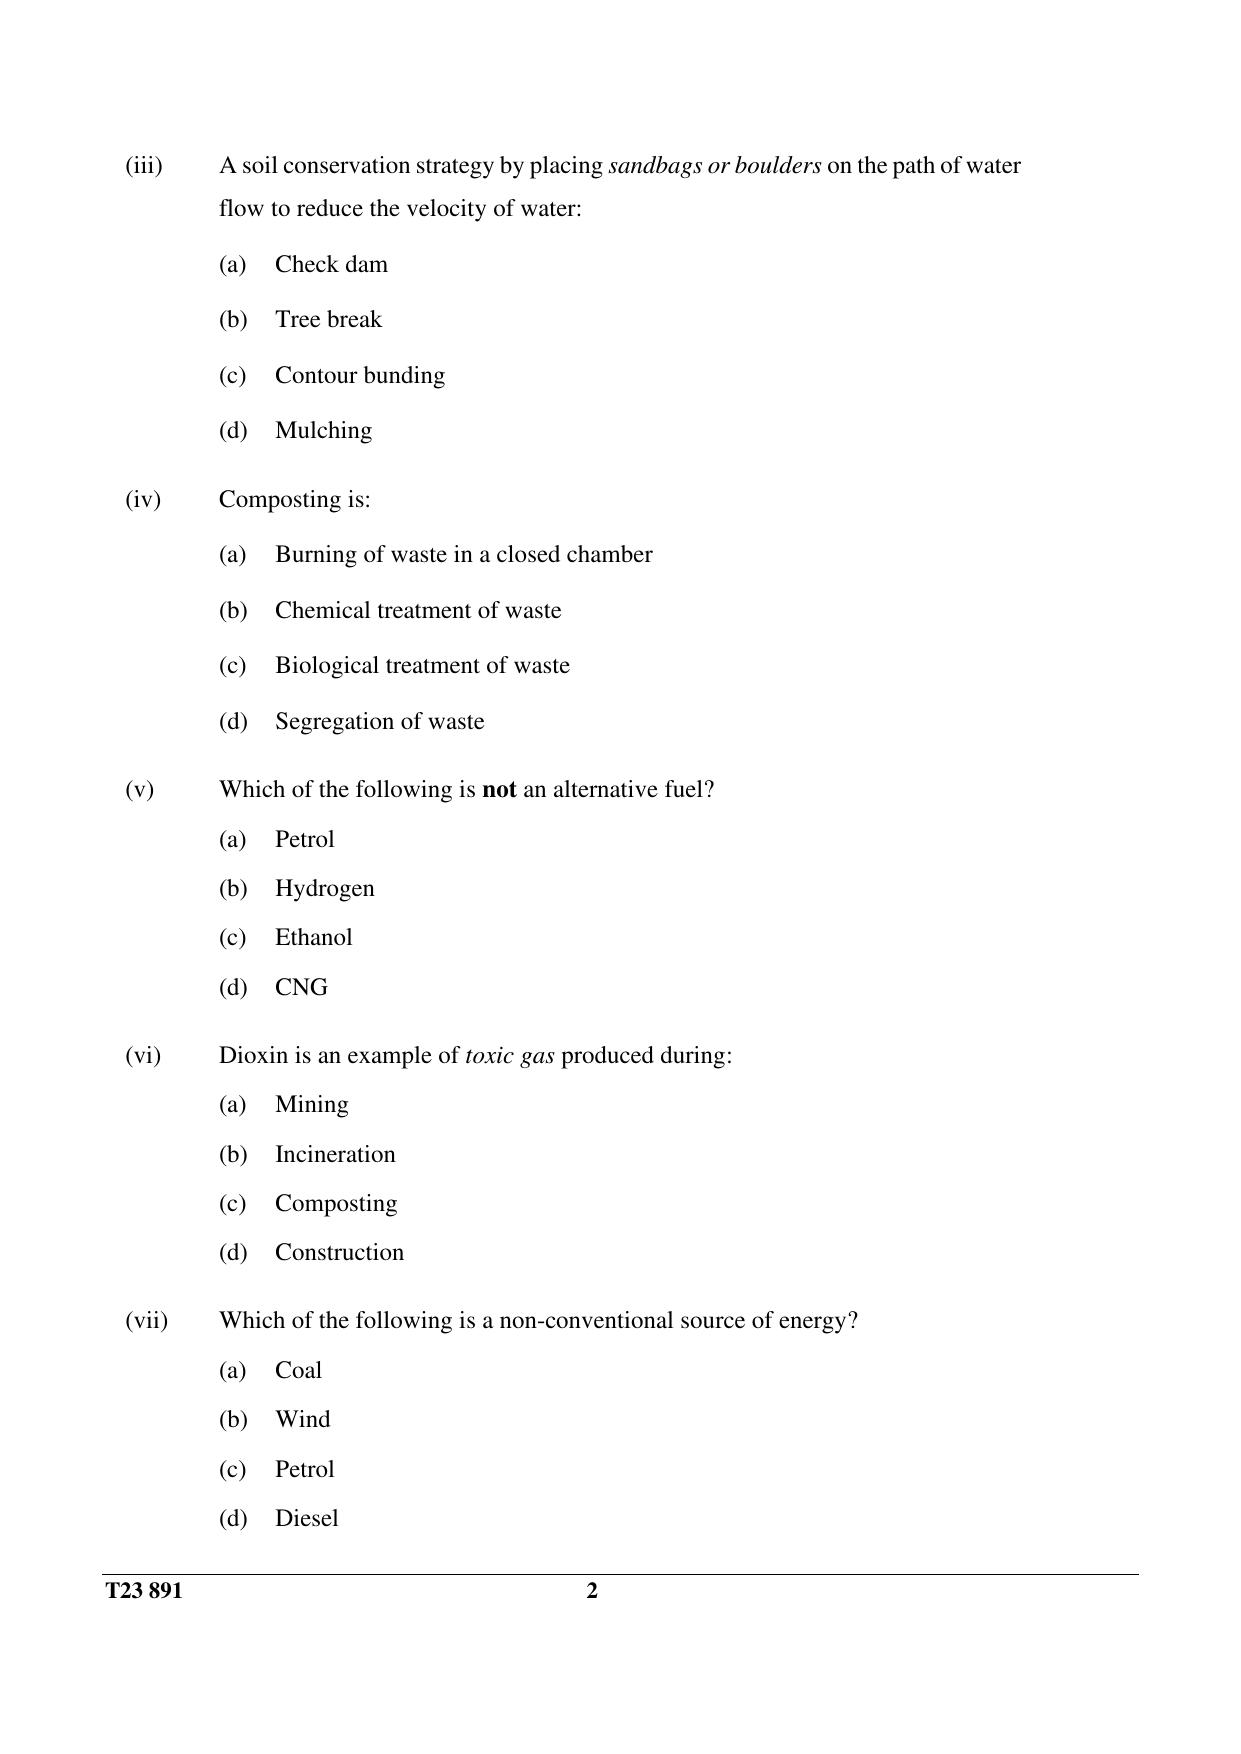 ICSE Class 10 ENVIRONMENTAL APPLICATIONS 2023 Question Paper - Page 2